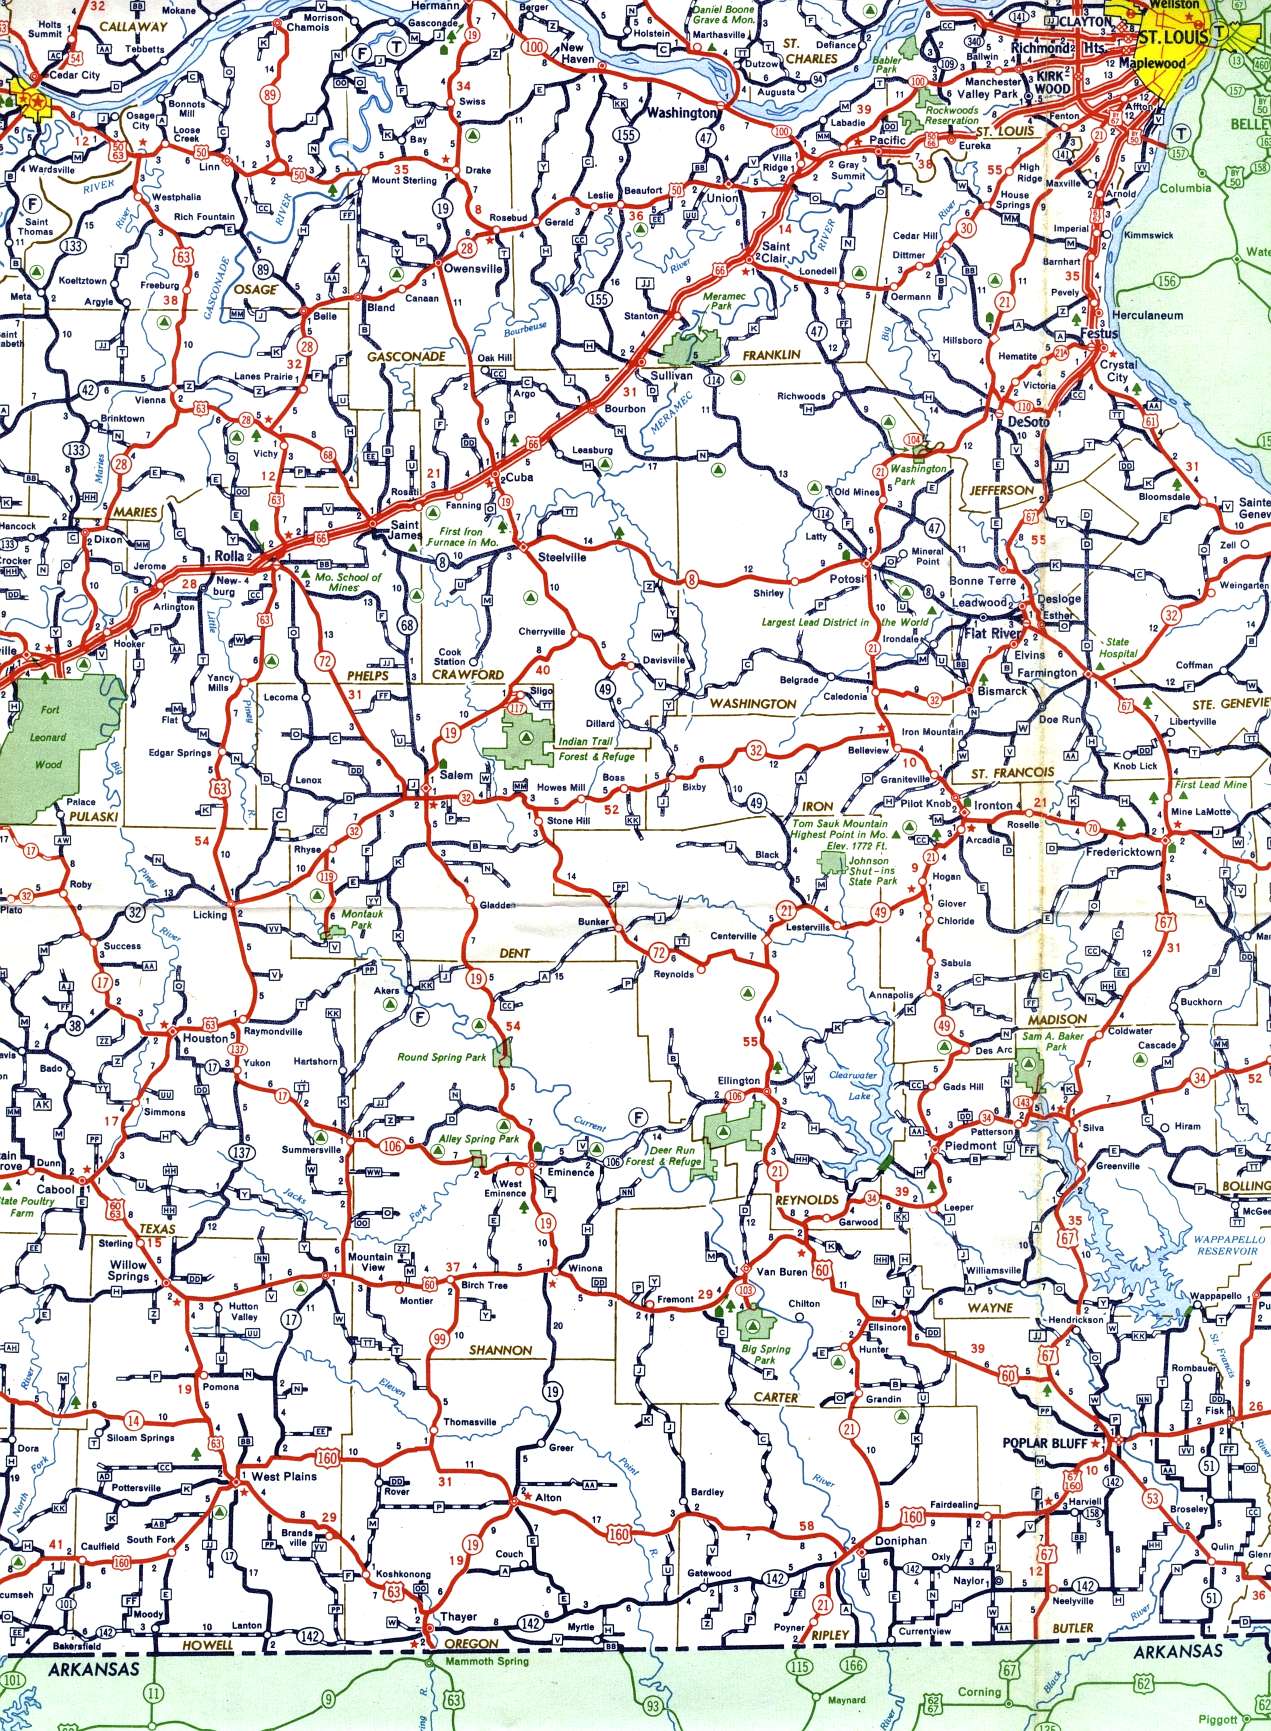 Southeast-central section of Missouri from 1958 official highway map